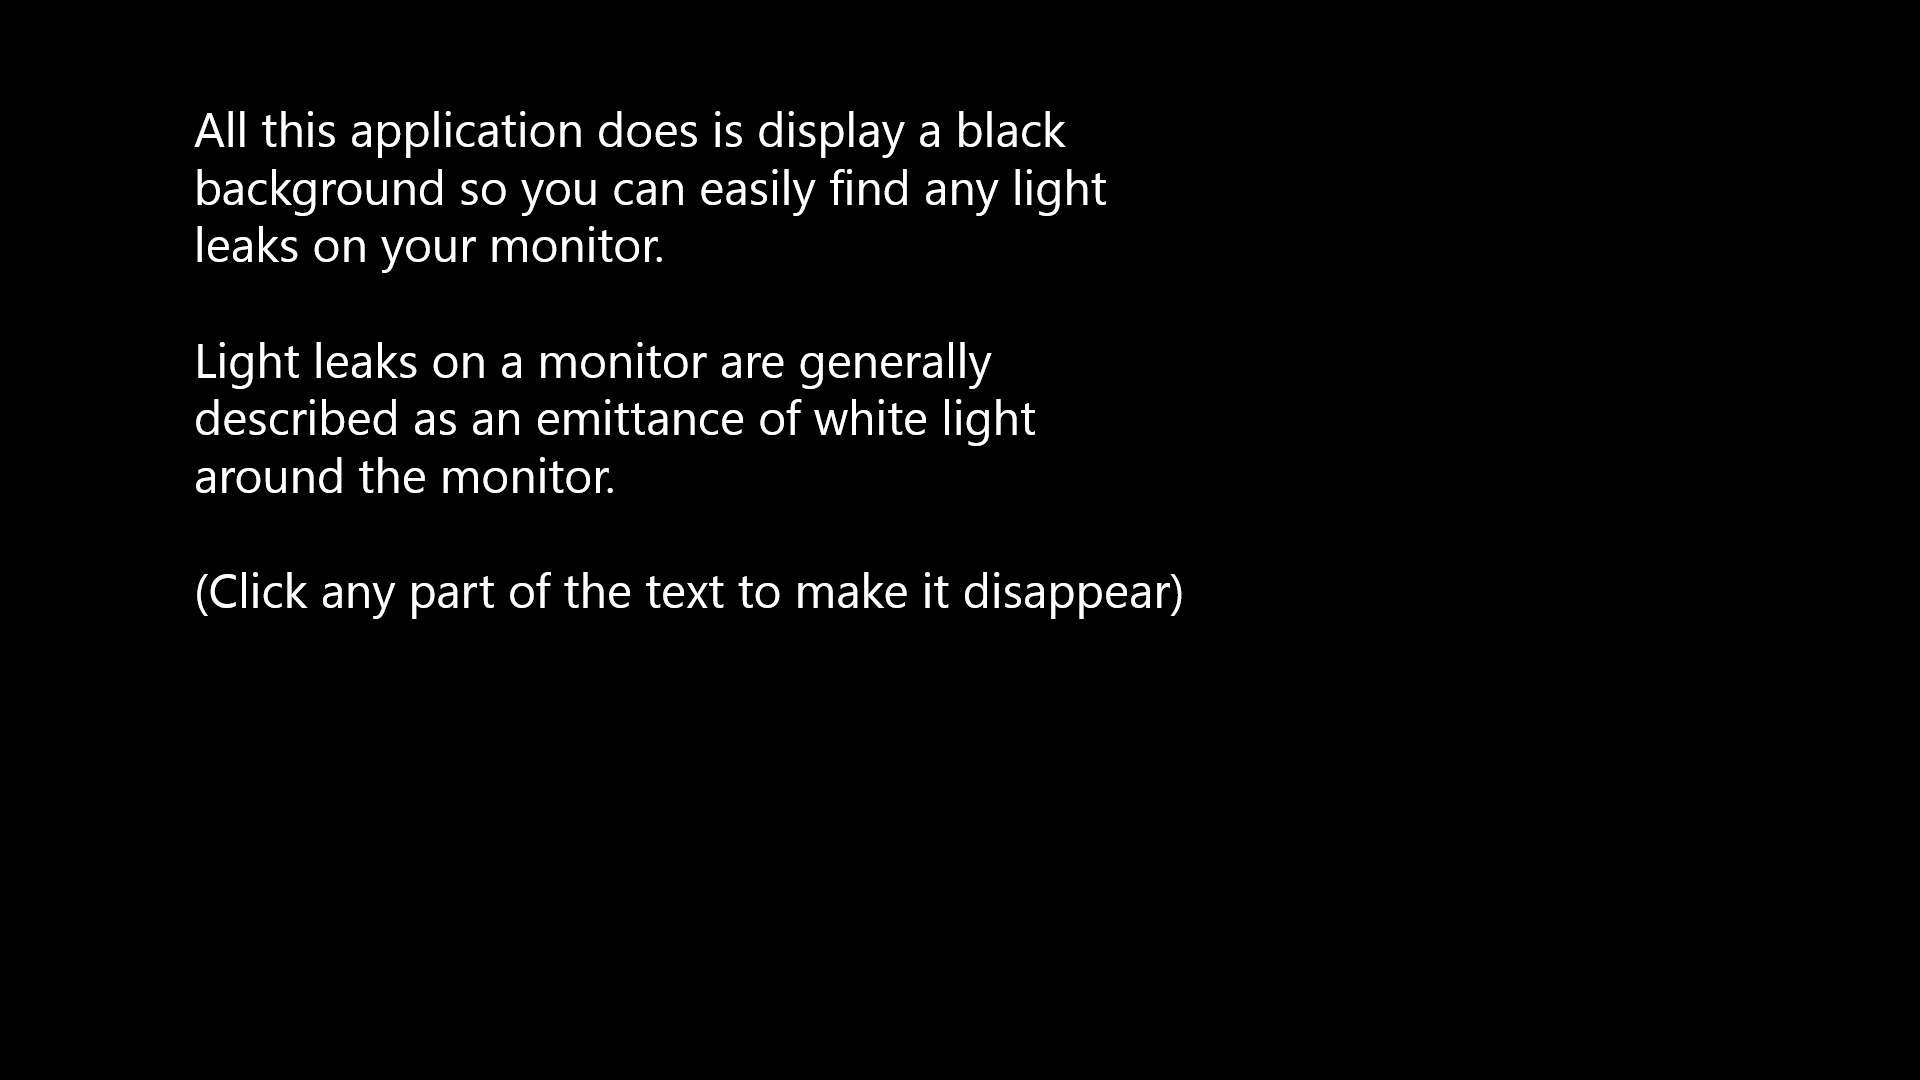 Displays a black background so you can easily find any light leaks on your monitor.